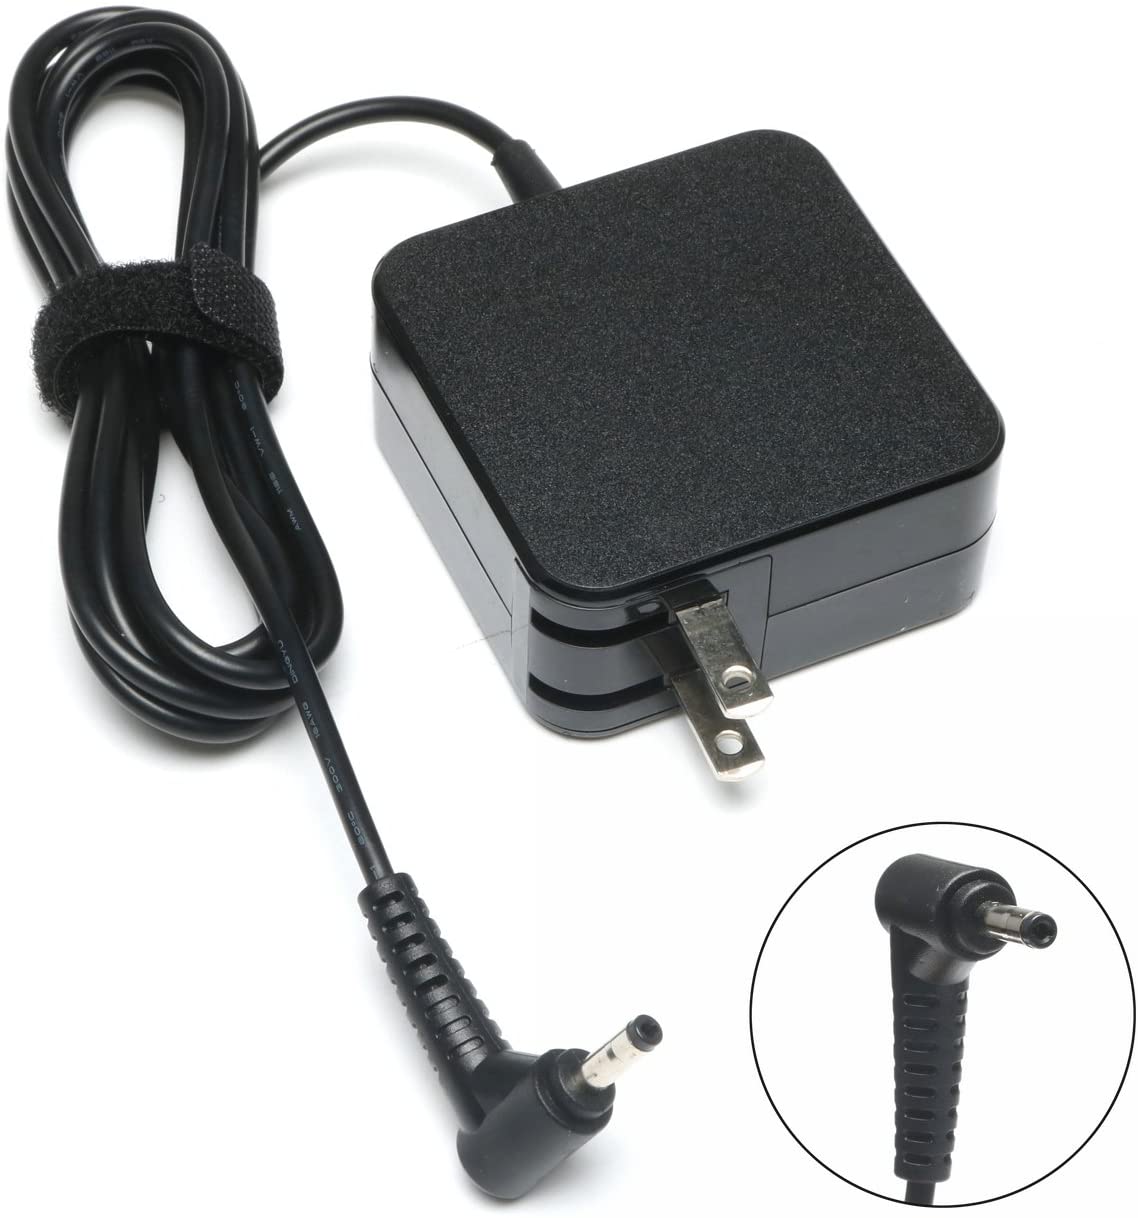 Techie 40W 20V 2.25A Pin size 4.0mm x 1.7mm compatible Lenovo laptop charger.